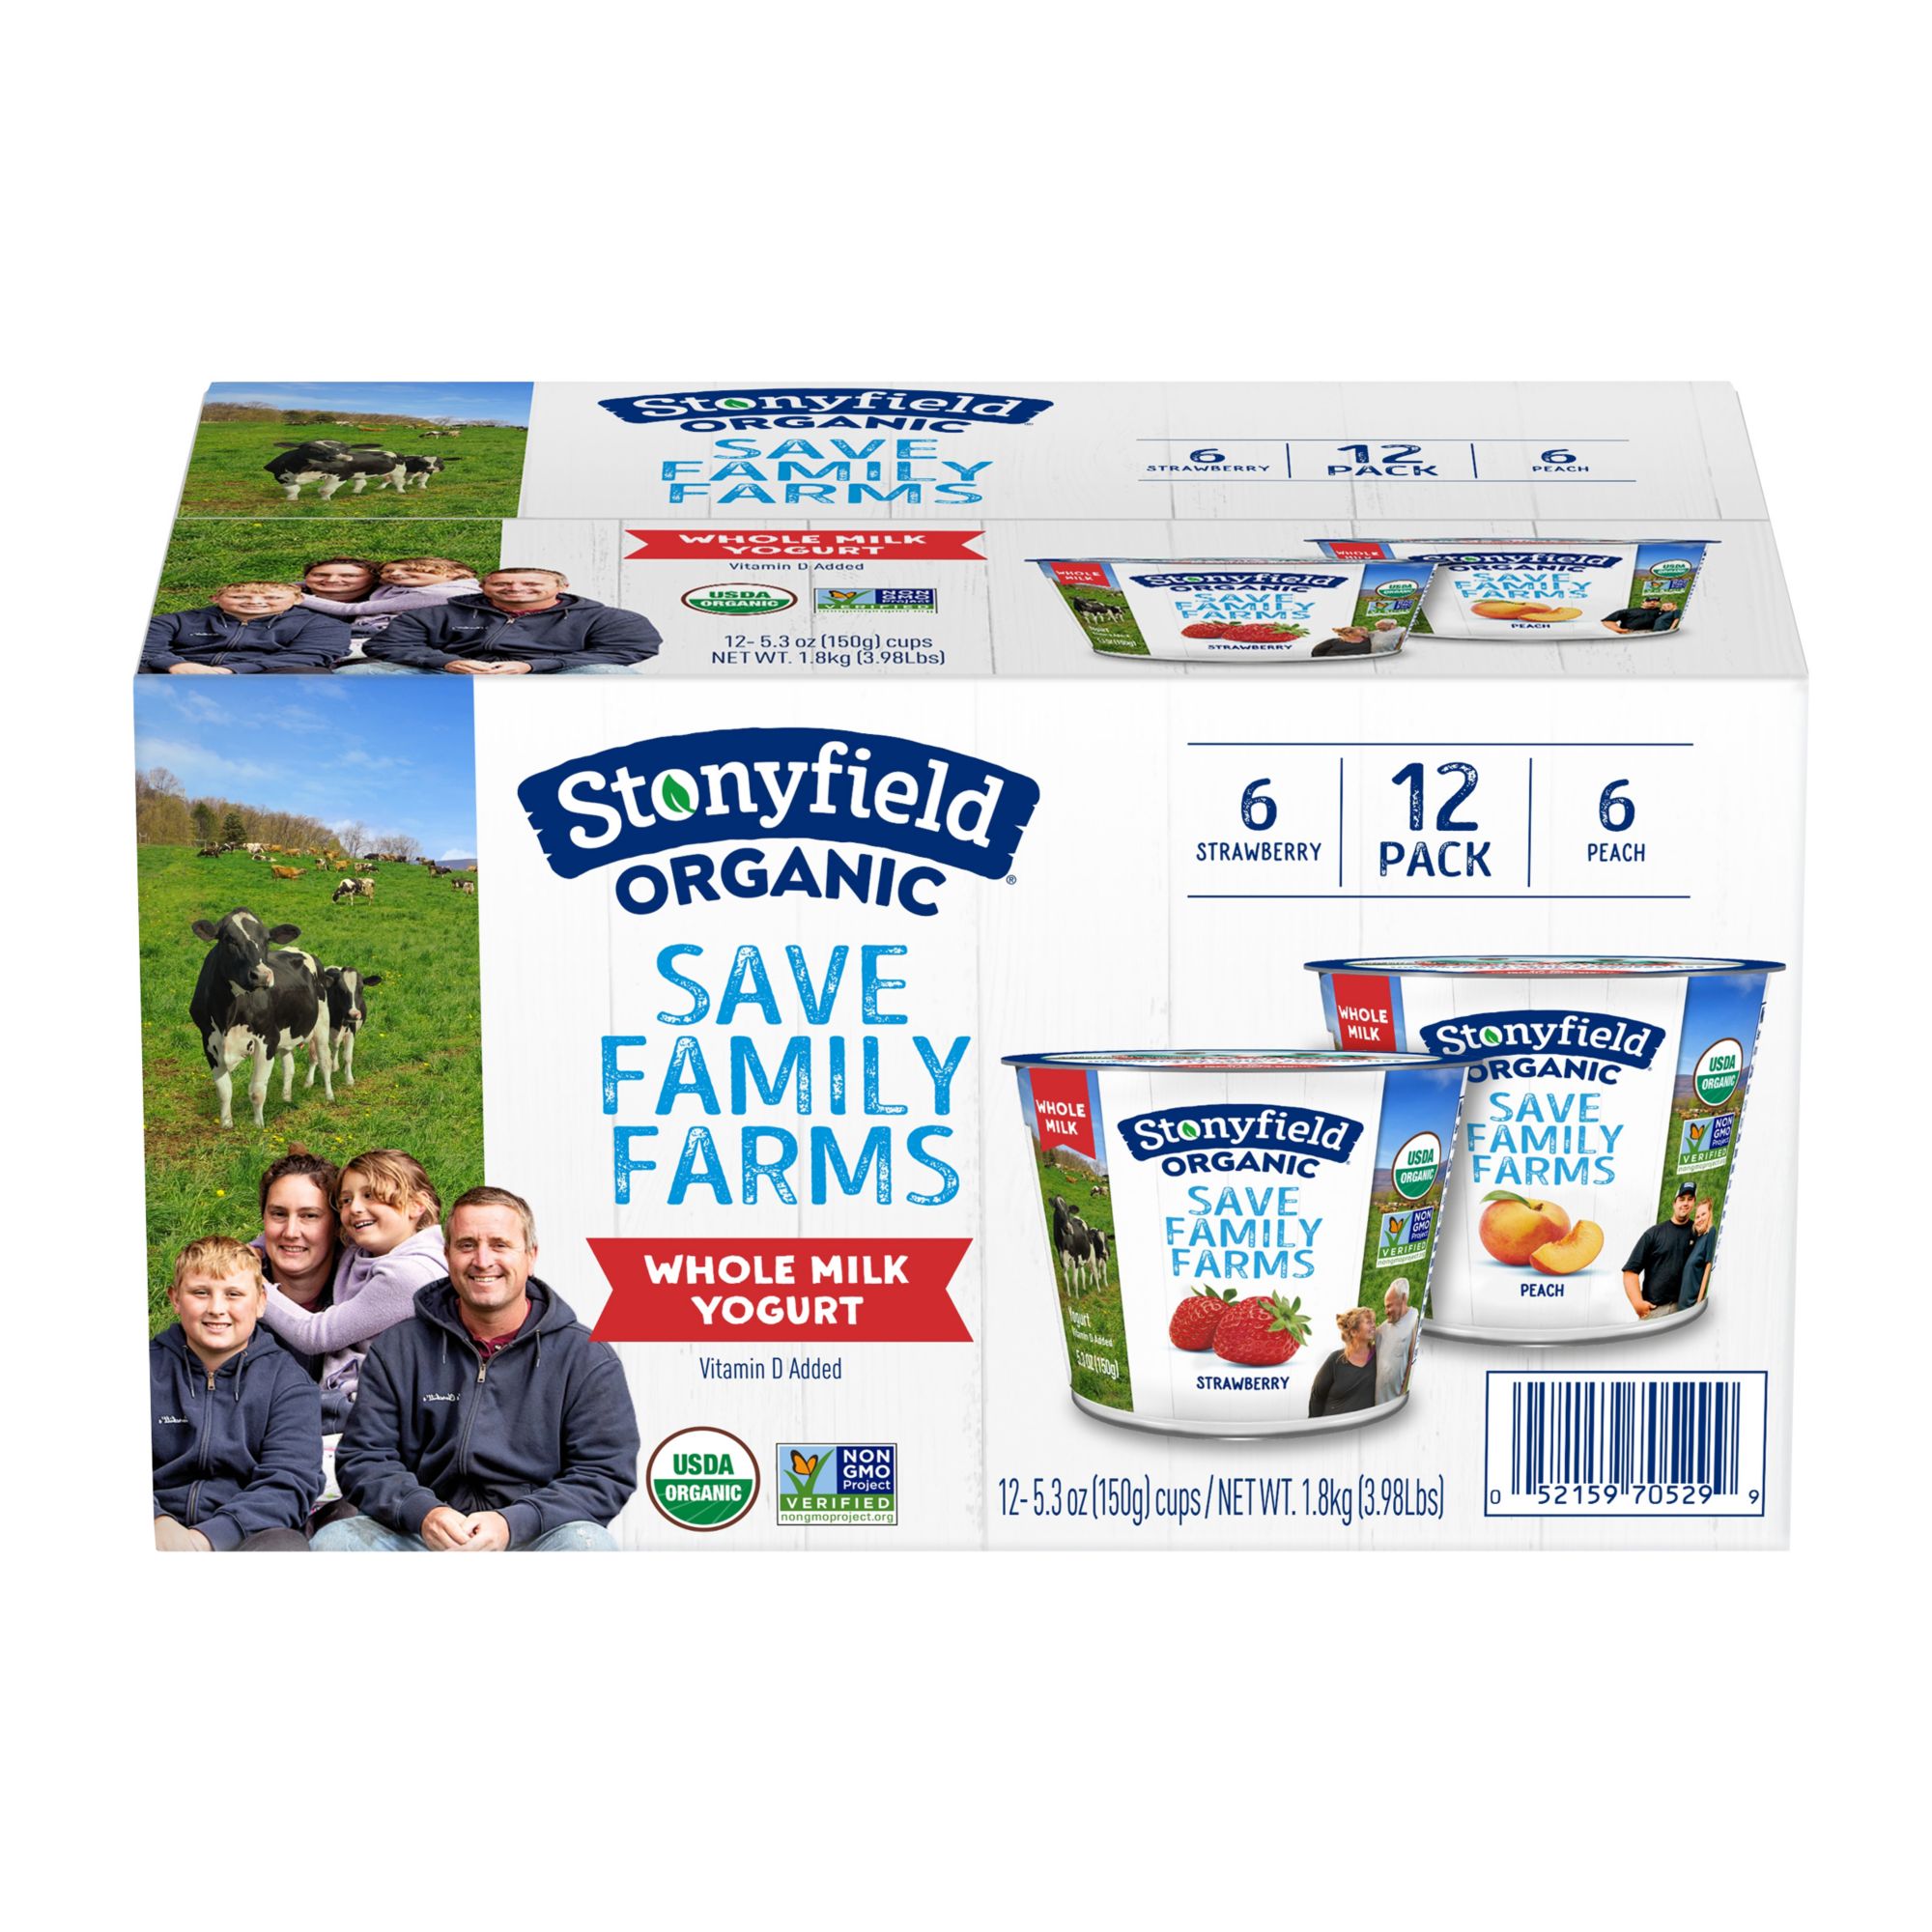 Stonyfield Organic Save Family Farms Peach & Strawberry Variety Pack, 12 ct./5.3 oz.